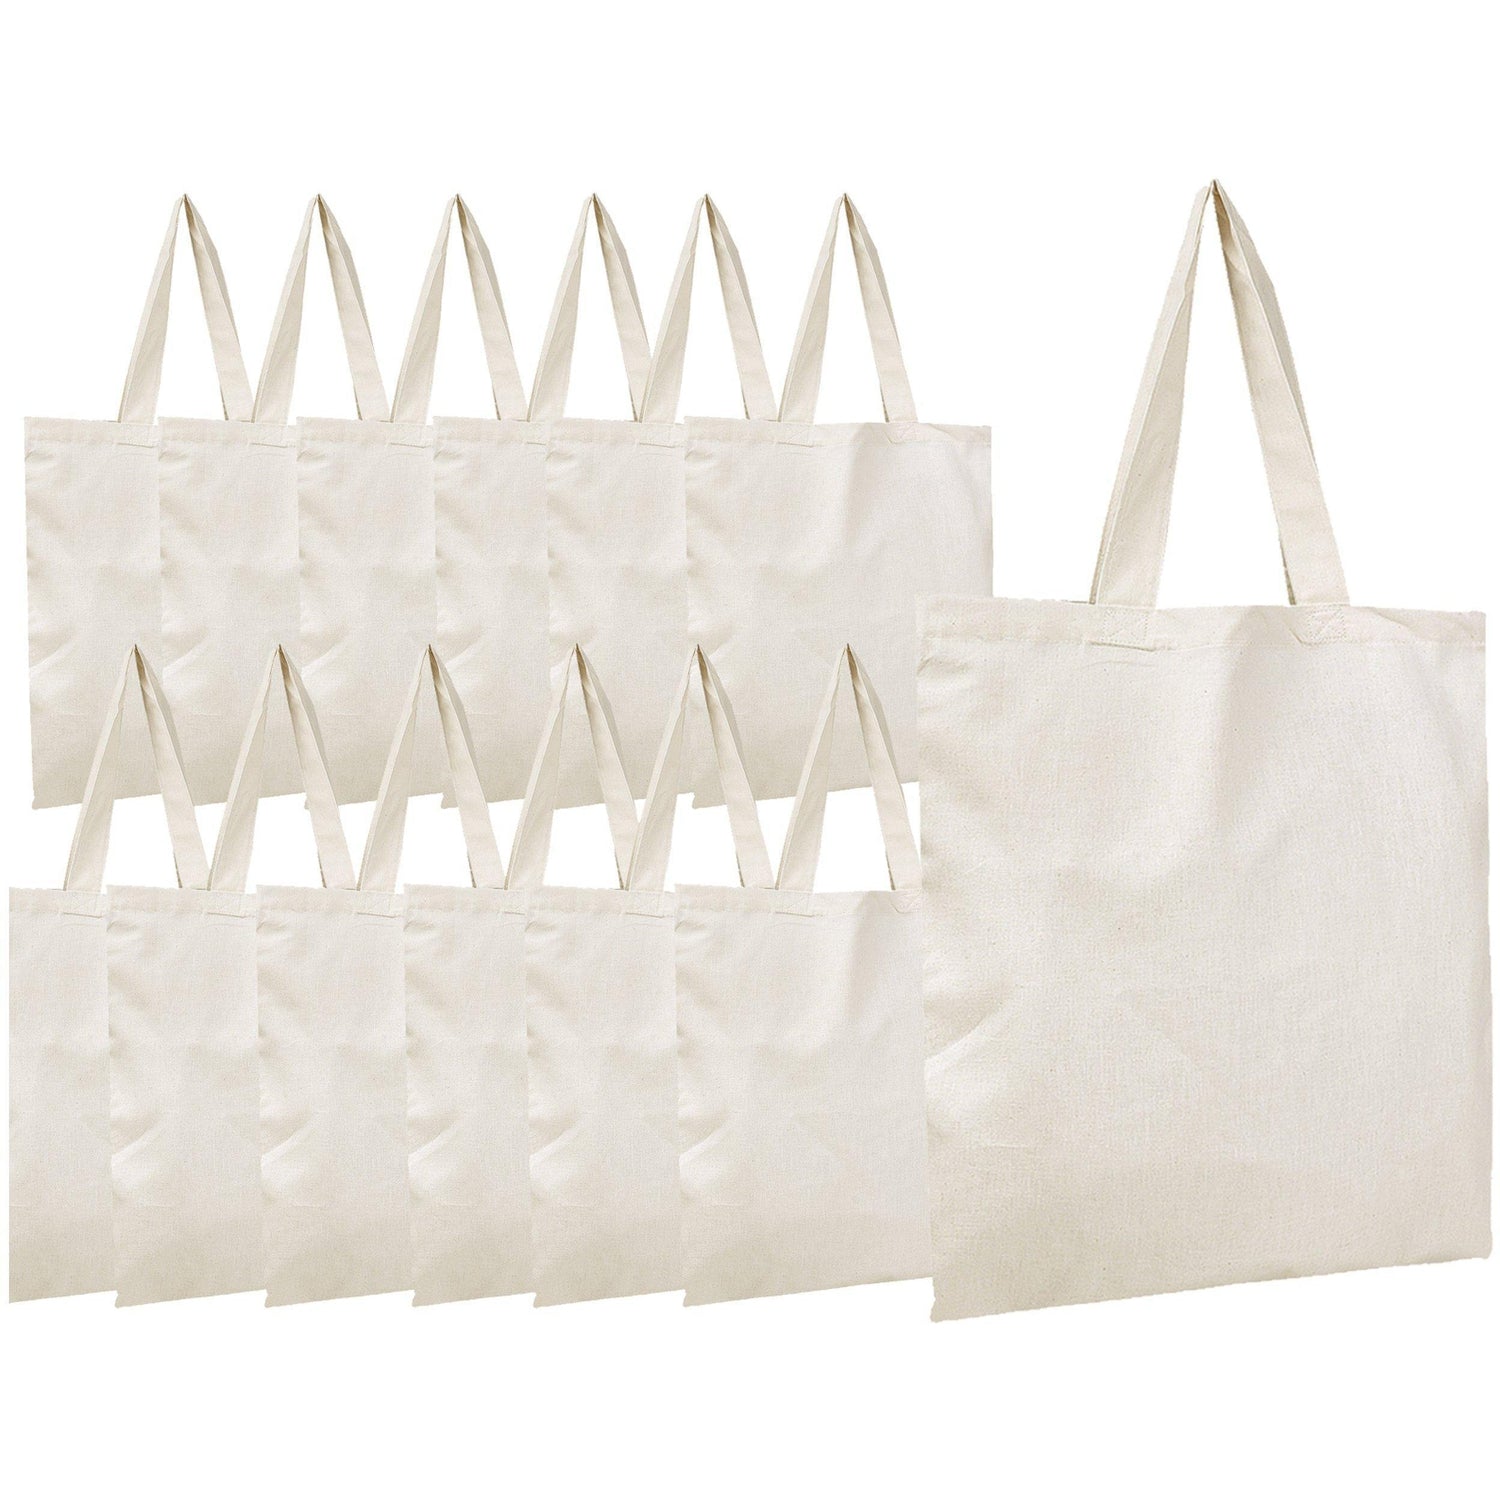 Cotton Canvas Tote Bags in Bulk - 12 Pack - Cotton Tote Bags Wholesale